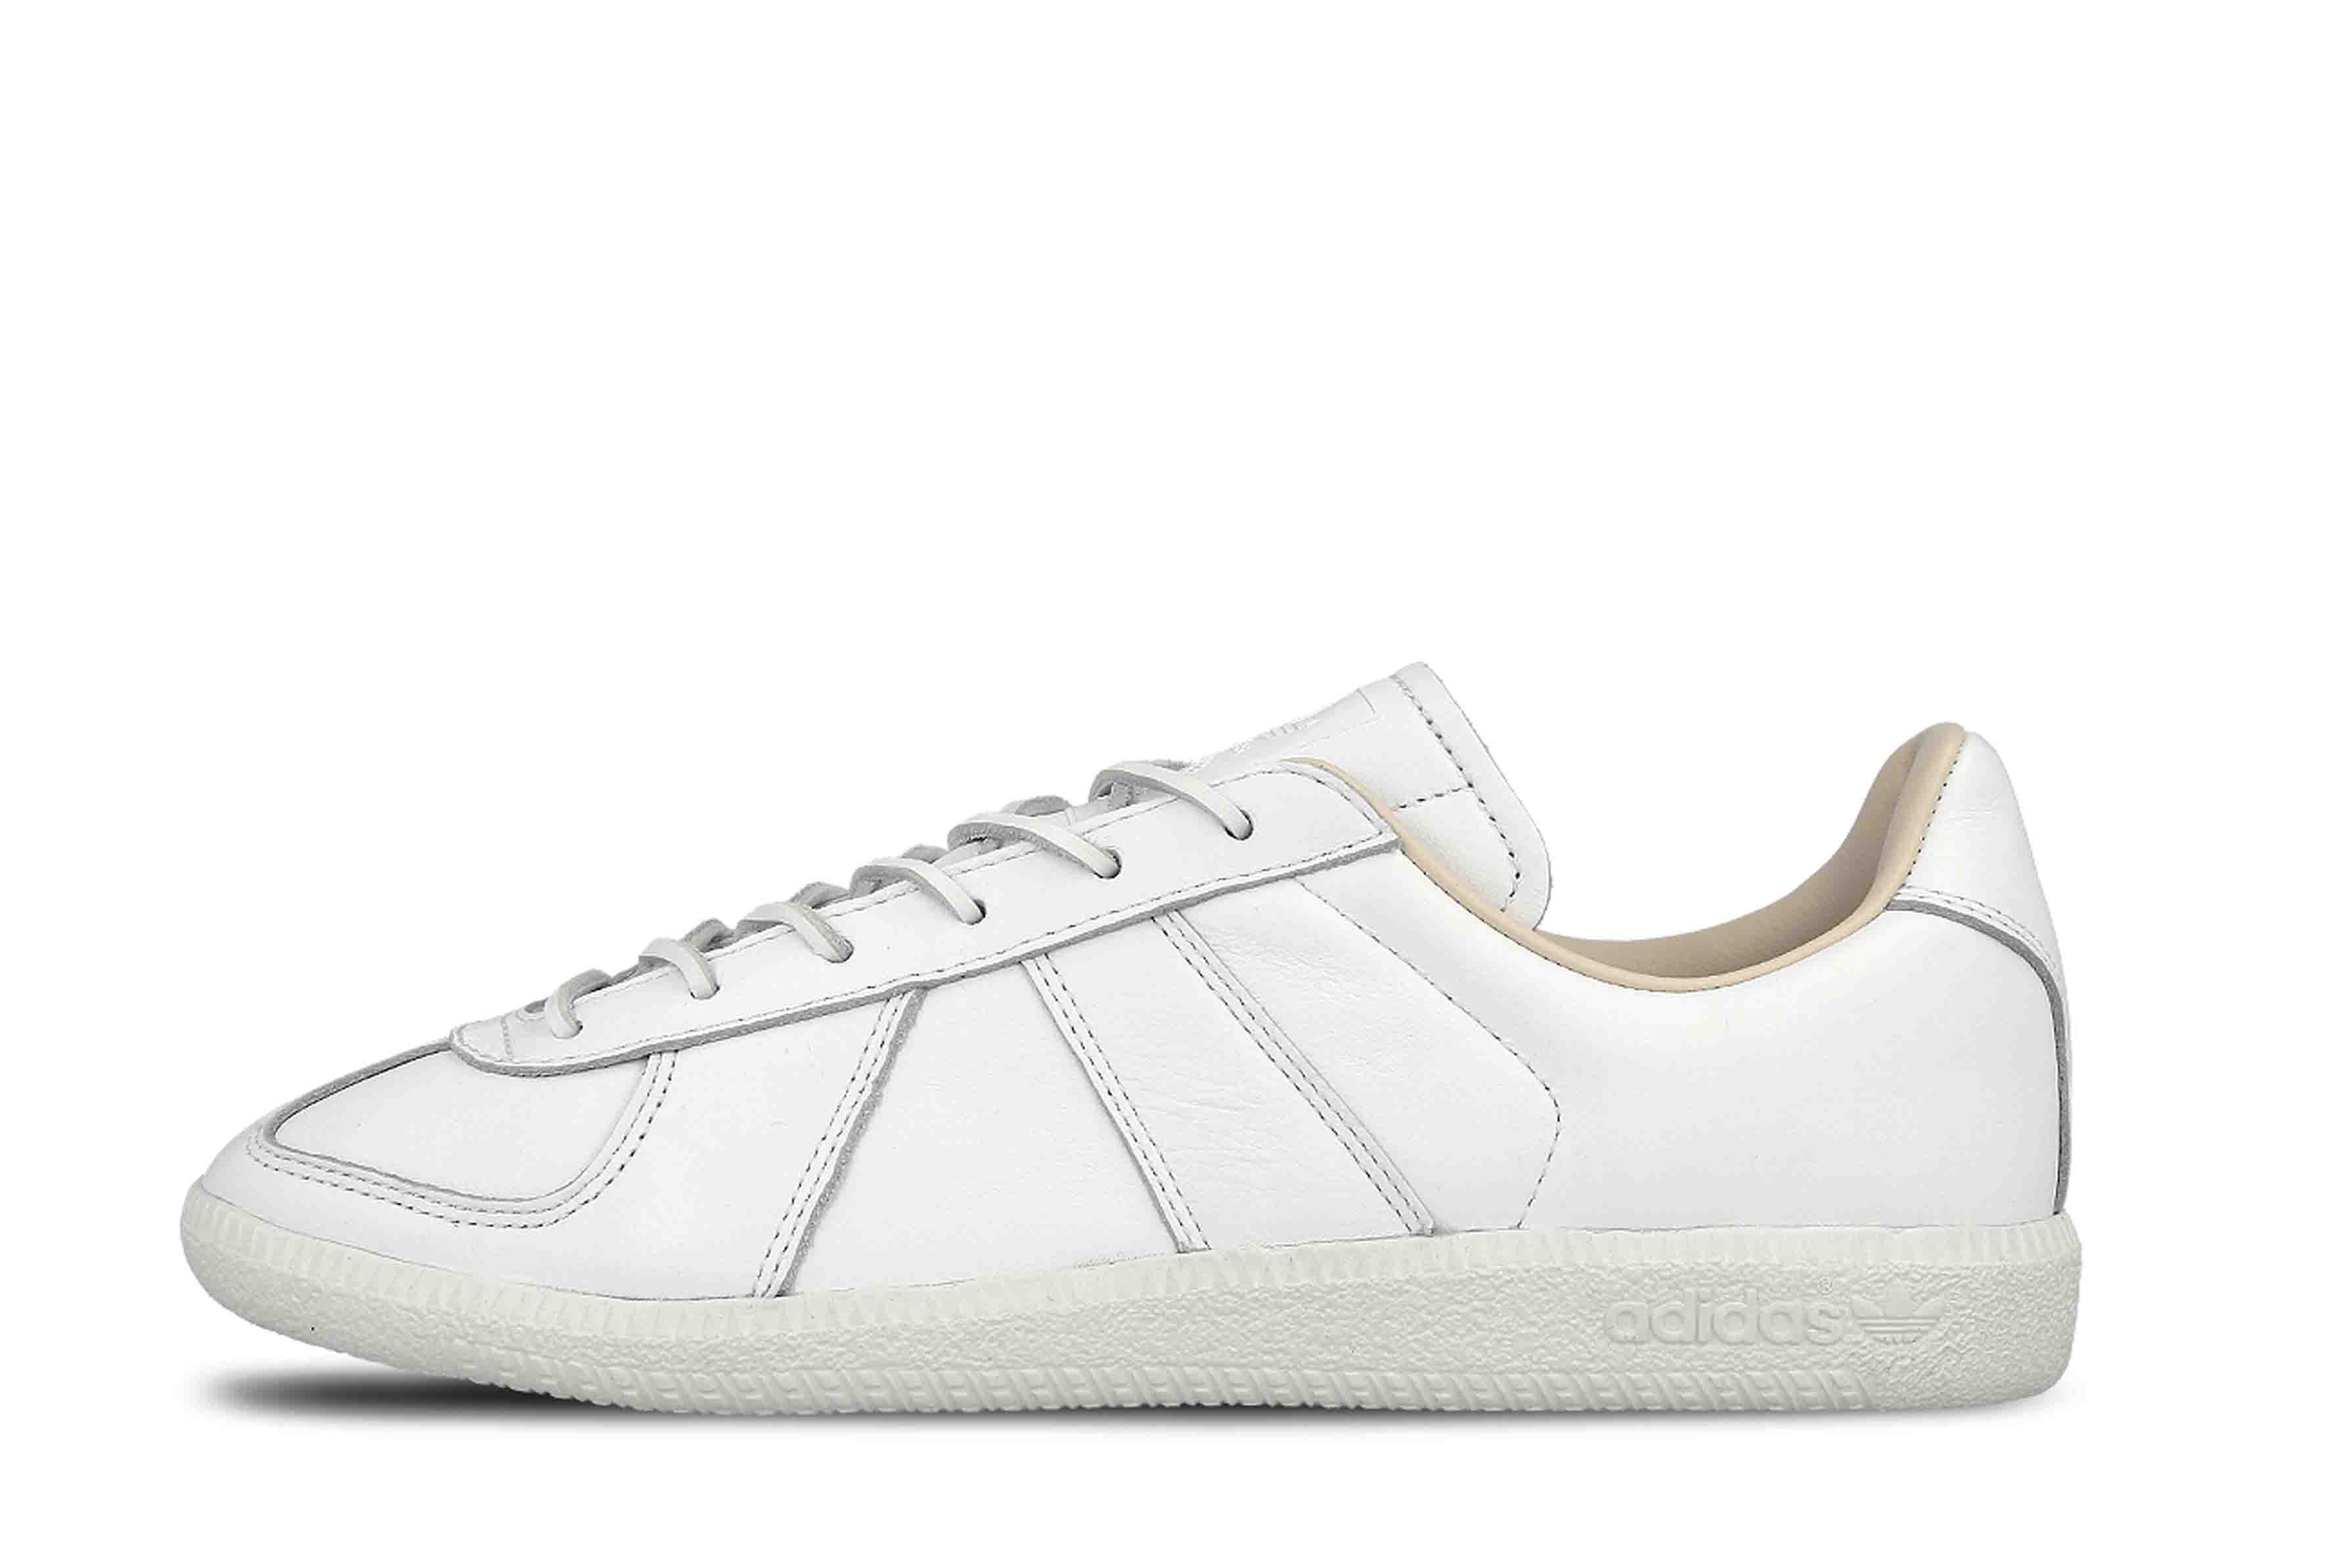 adidas originals BW Army Sneakers Footwear White/Linen